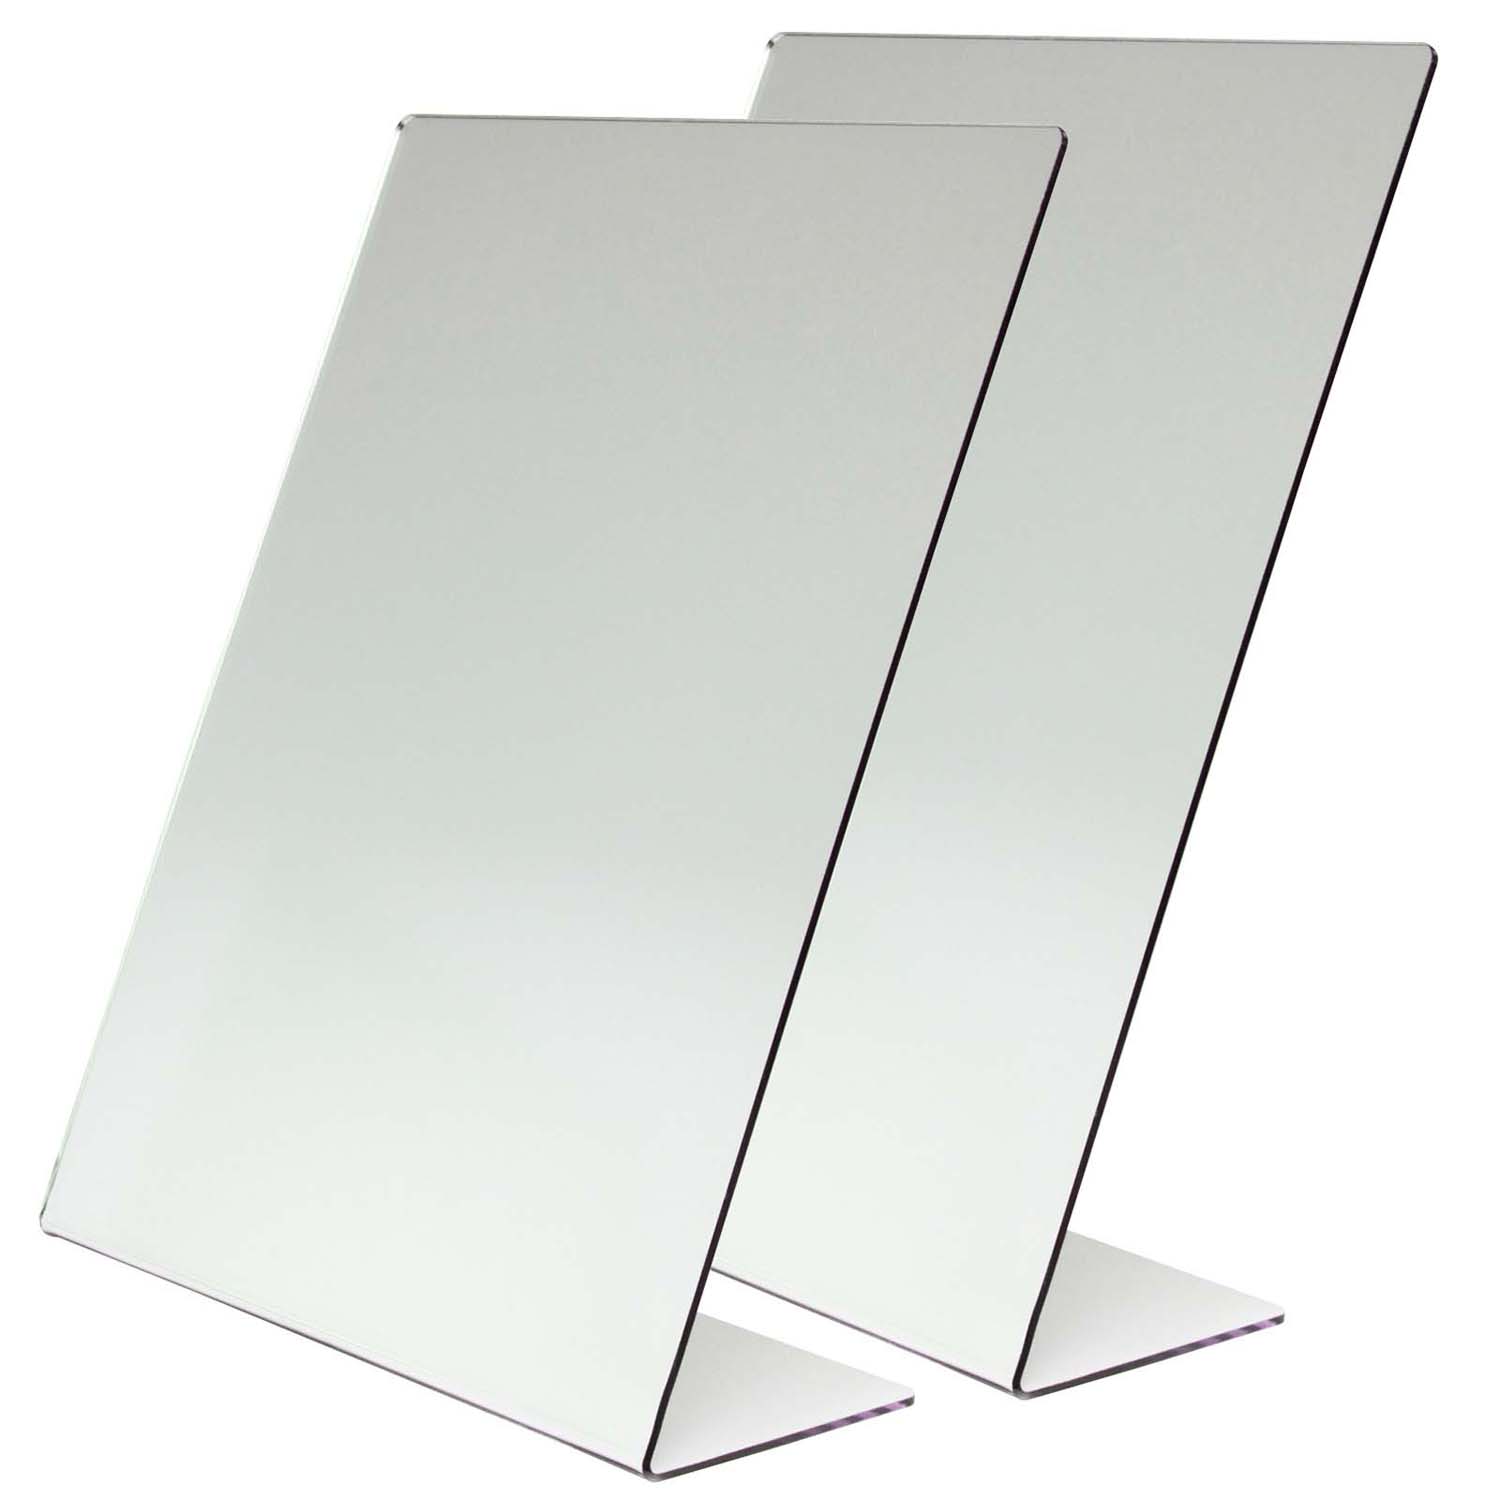 One-Sided Self-Portrait Mirror, 8-1/2" x 11", Pack of 2